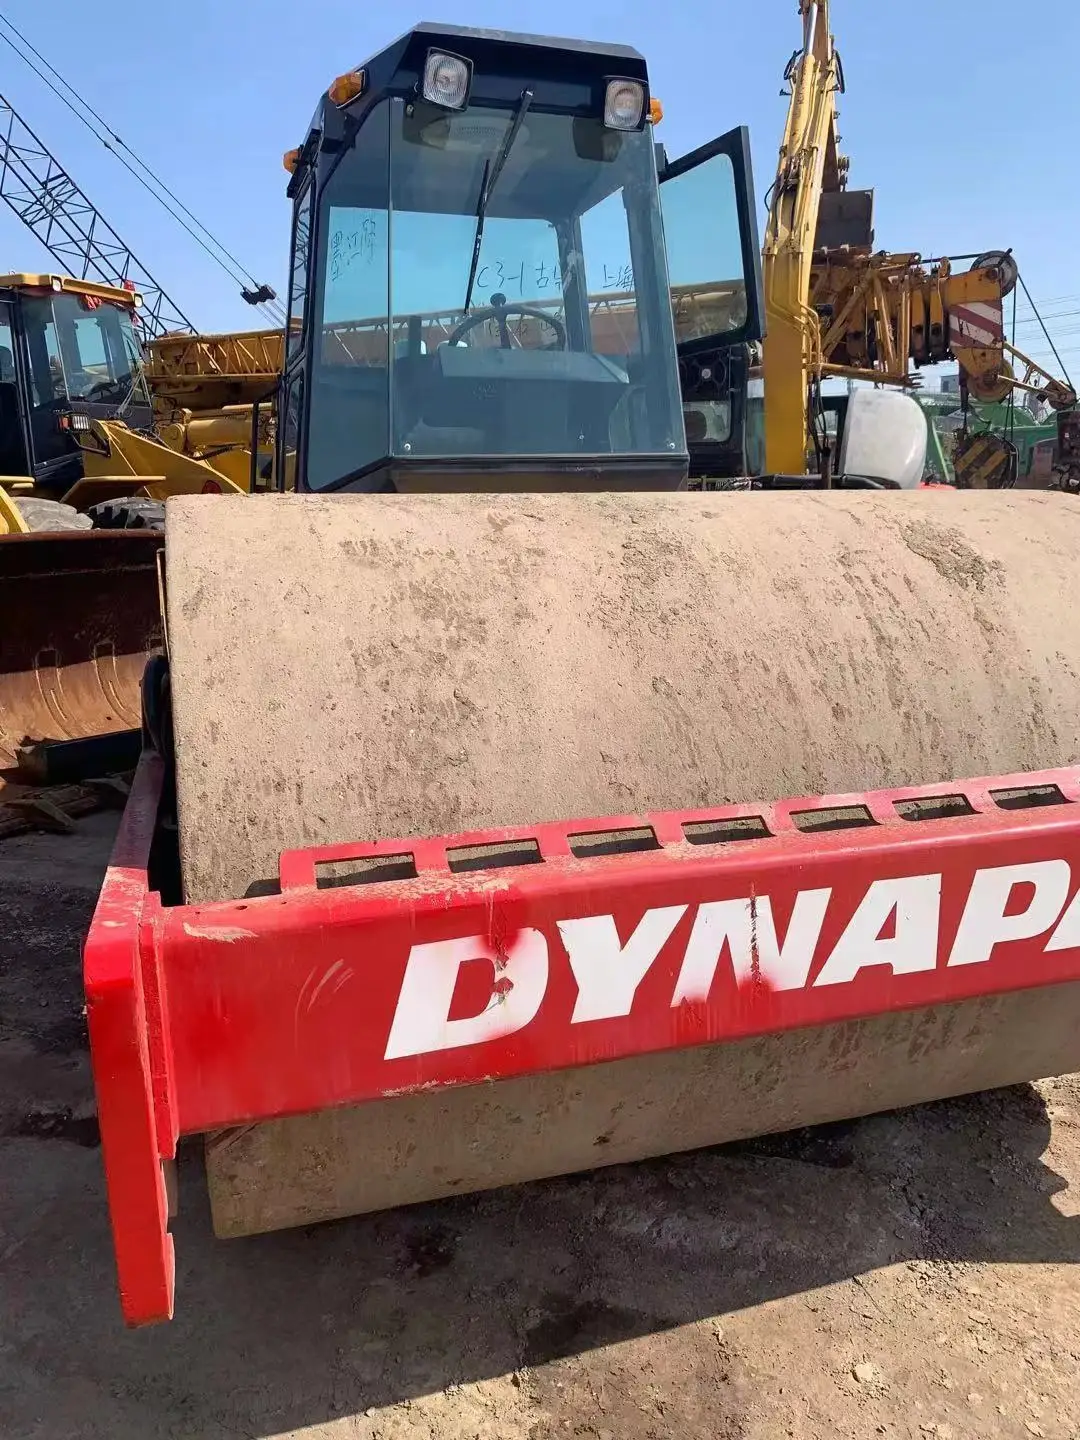 Cheap to sale Used DYNAPAC CA30D/CA25D CA251D road roller